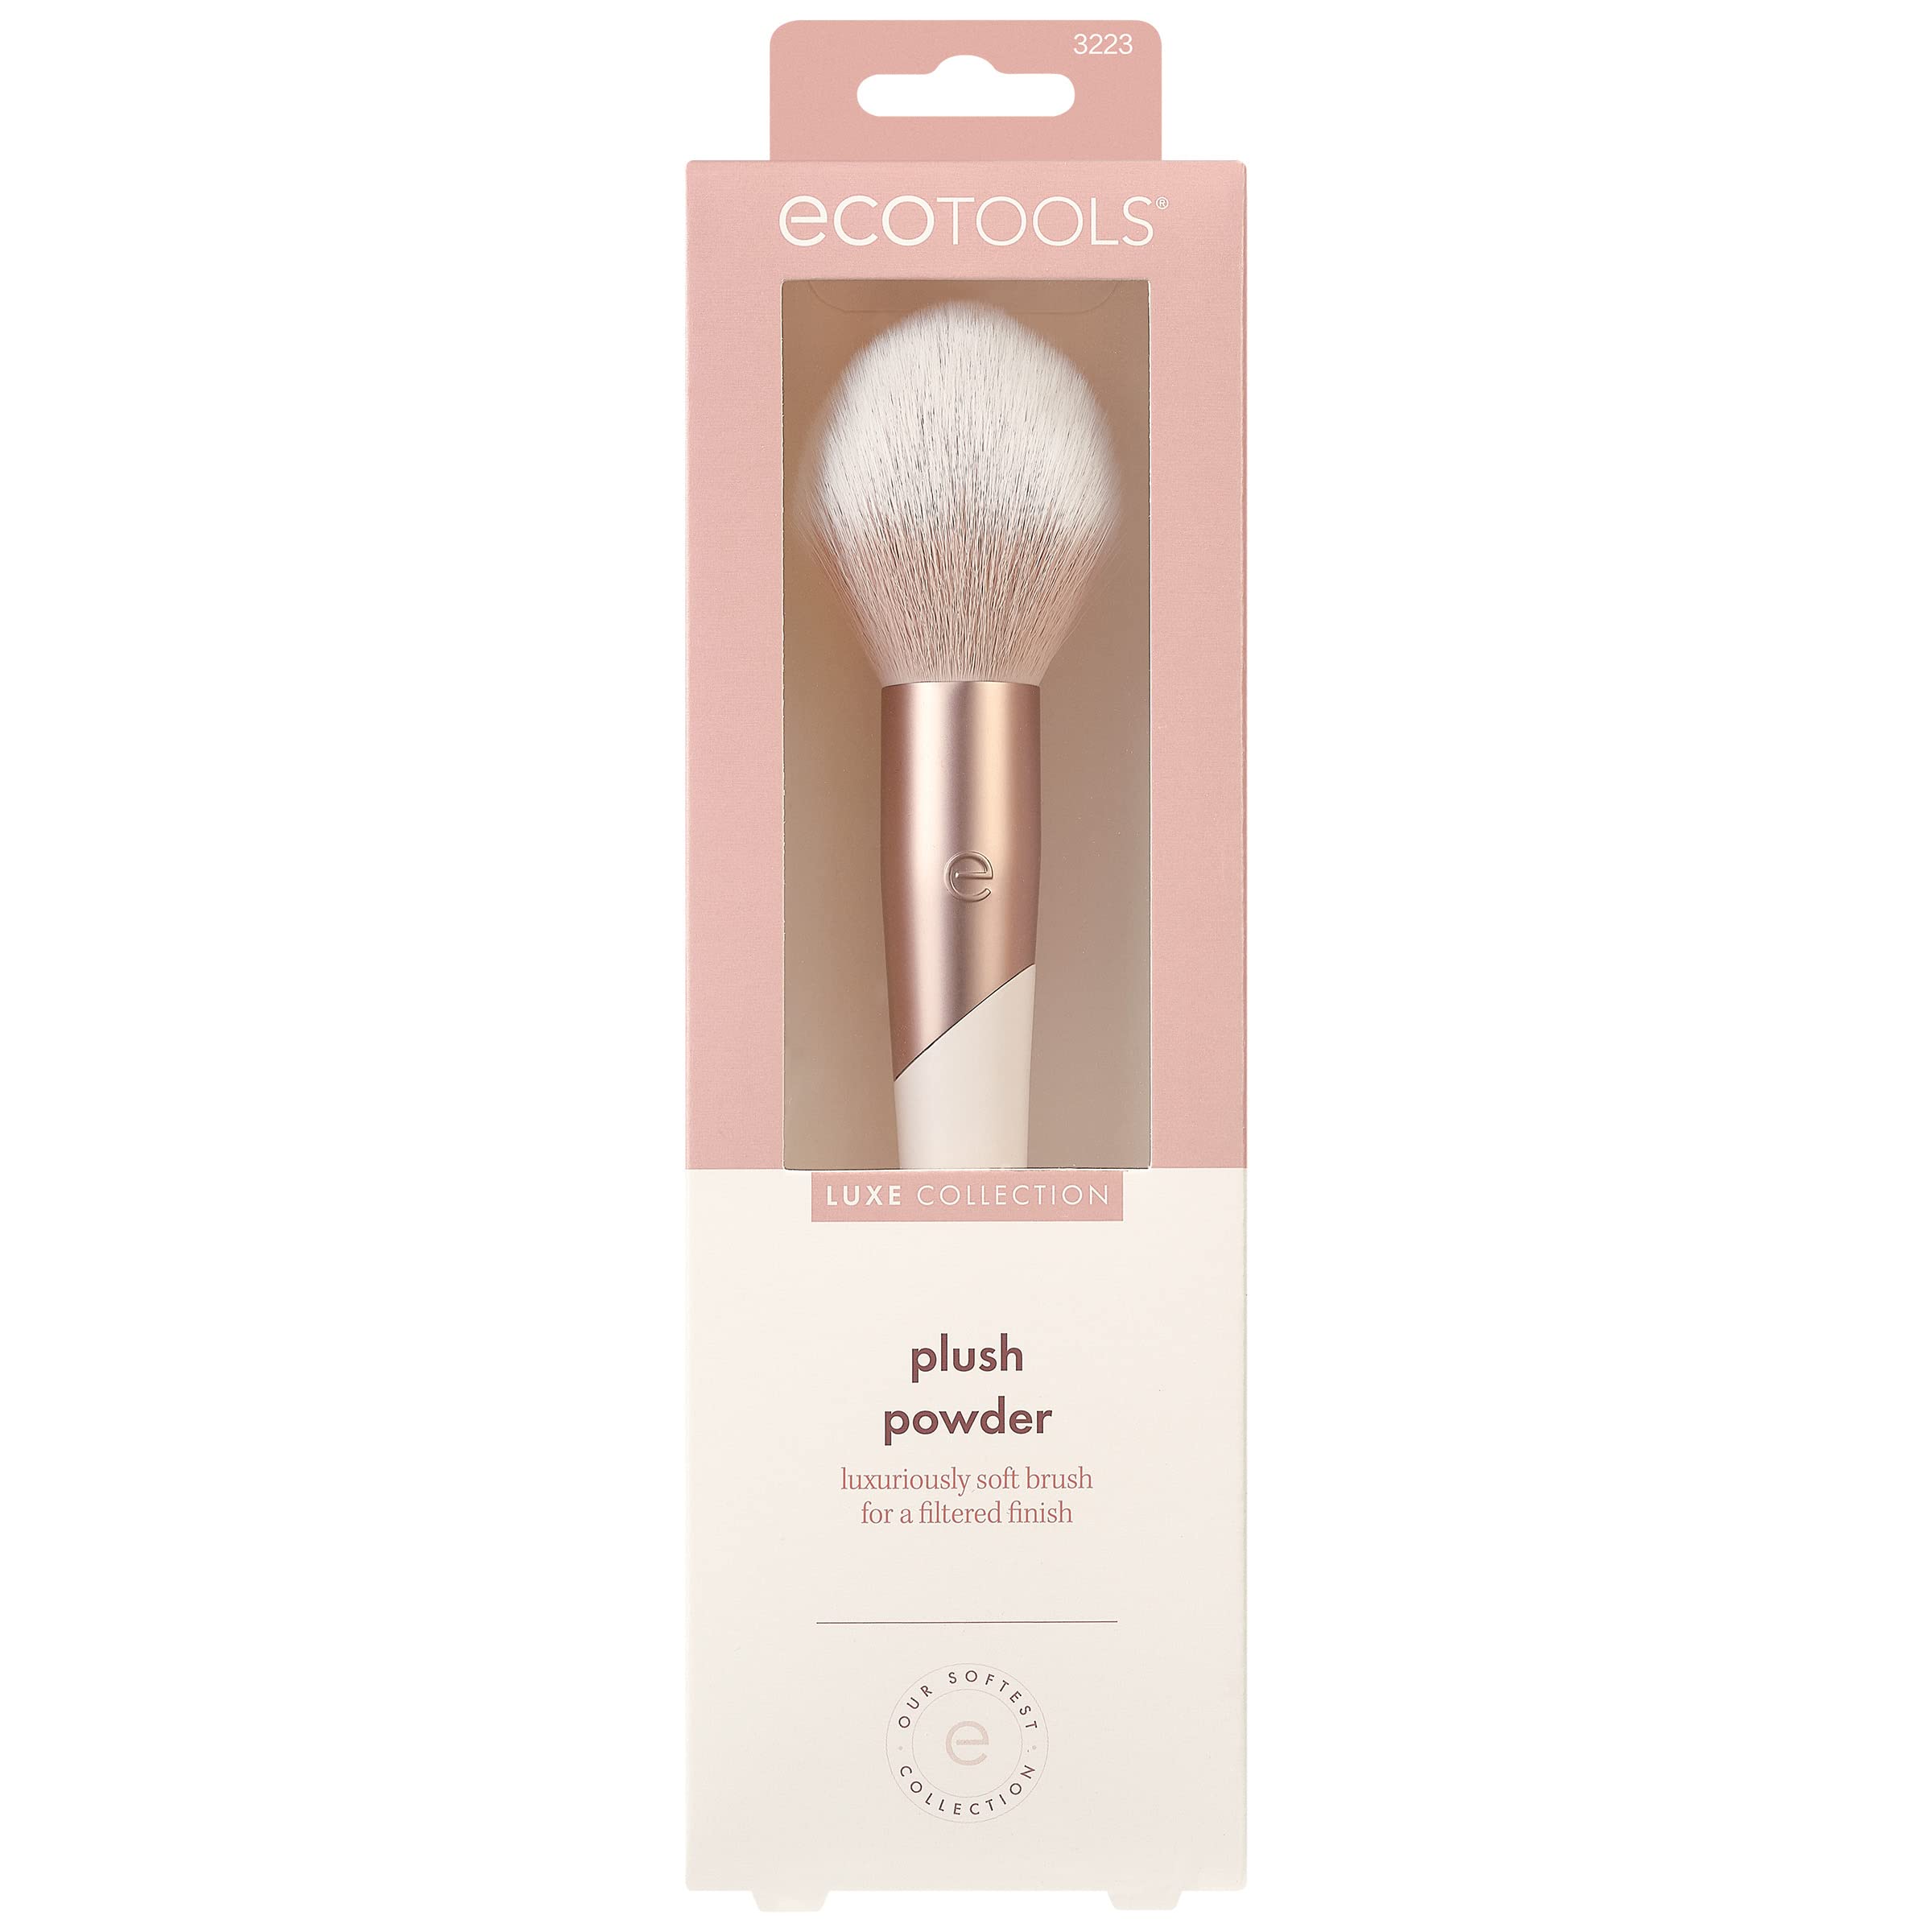 EcoTools Luxe Plush Powder Makeup Brush for Blush & Bronzer, Works Best With Powder Makeup, Luxurious and Glamorous, Eco-Friendly Premium Makeup Brush, Synthetic Bristles, Pink, 1 Count